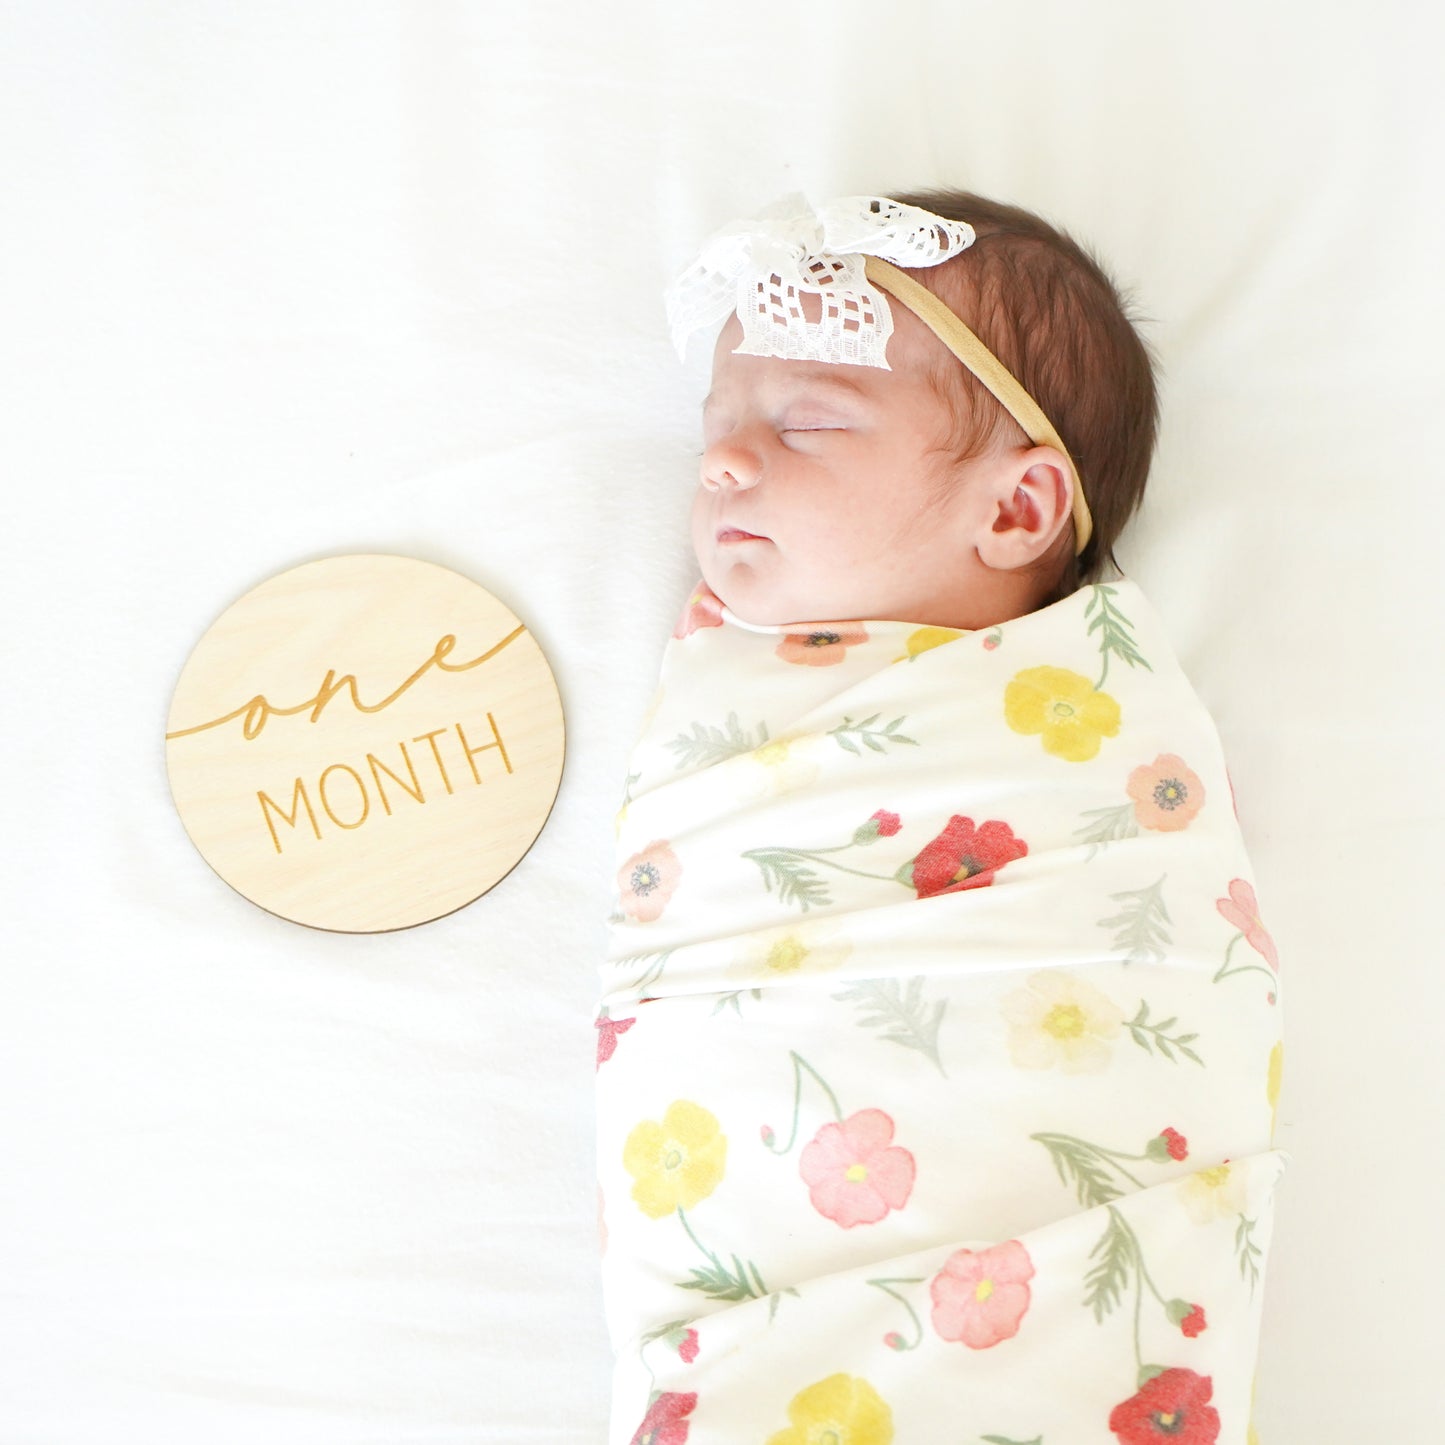 baby with one month sign, swaddle blanket, bow headband, sleeping, set, gift baby shower